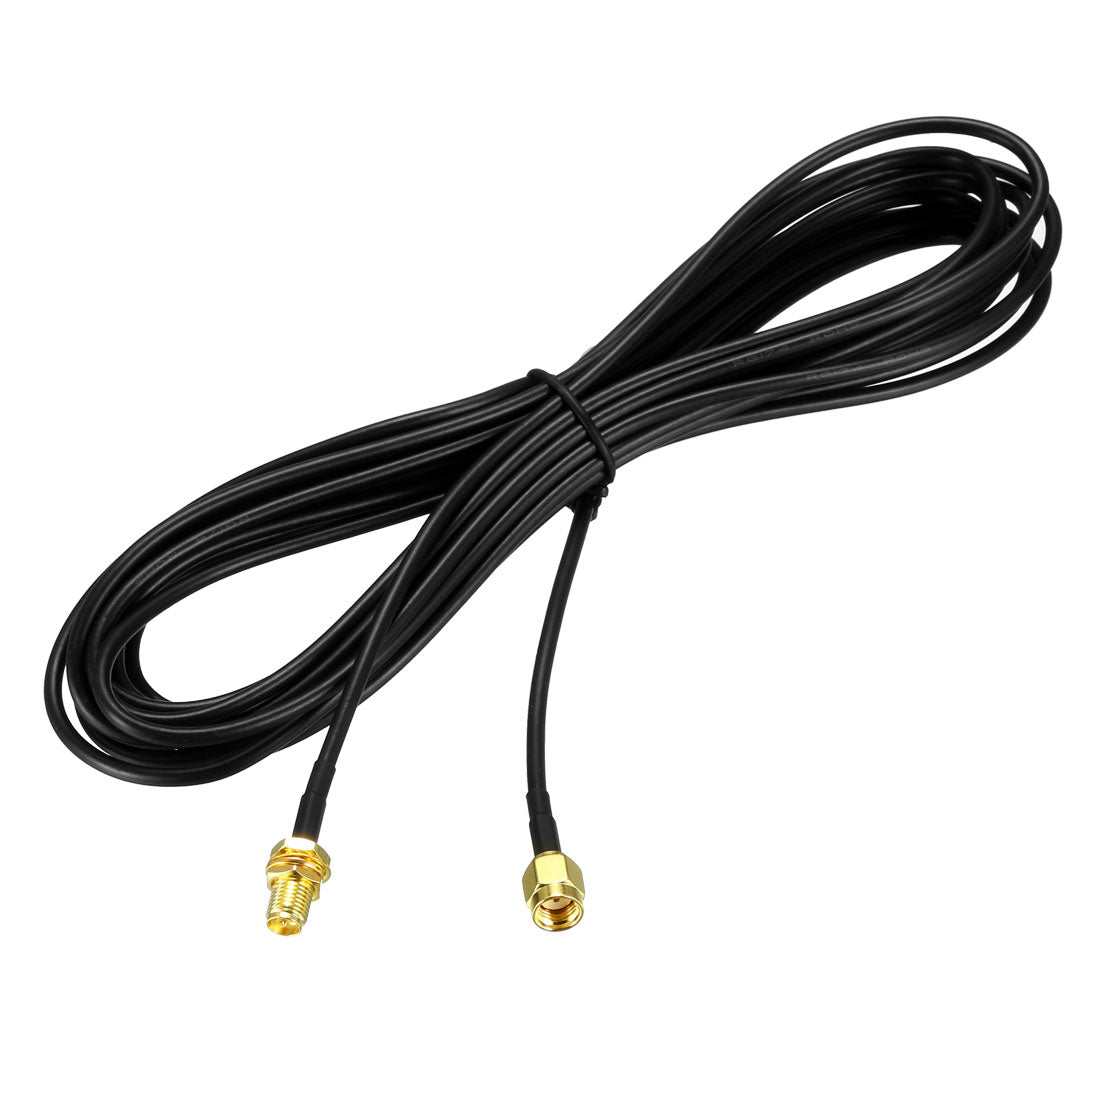 Uxcell Uxcell Antenna Extension Cable RP-SMA Male to RP-SMA Female Low Loss RG174 33 ft